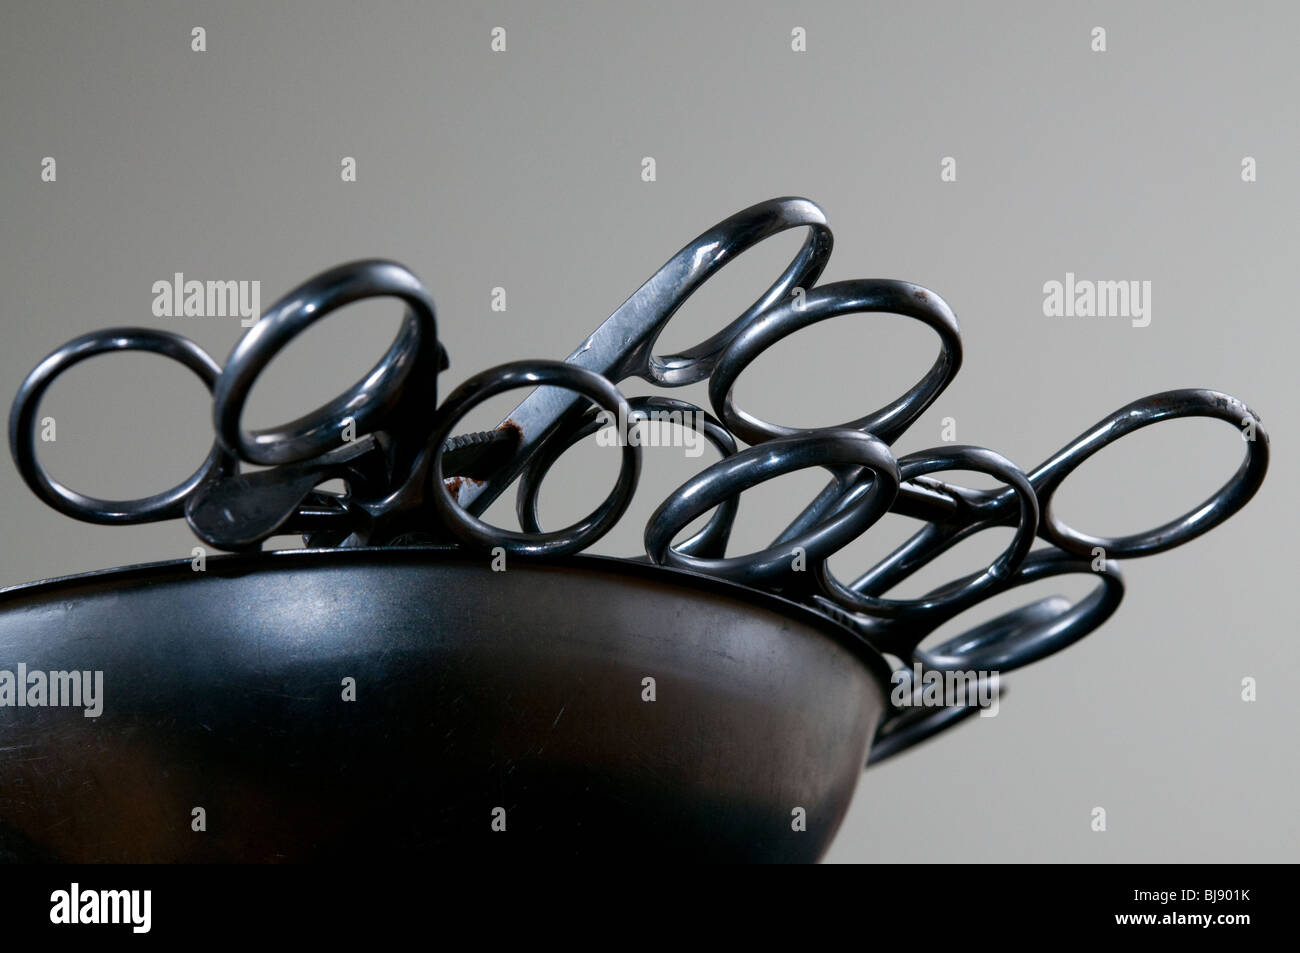 Forceps in a stainless steel kidney dish used in embalming and surgery Stock Photo